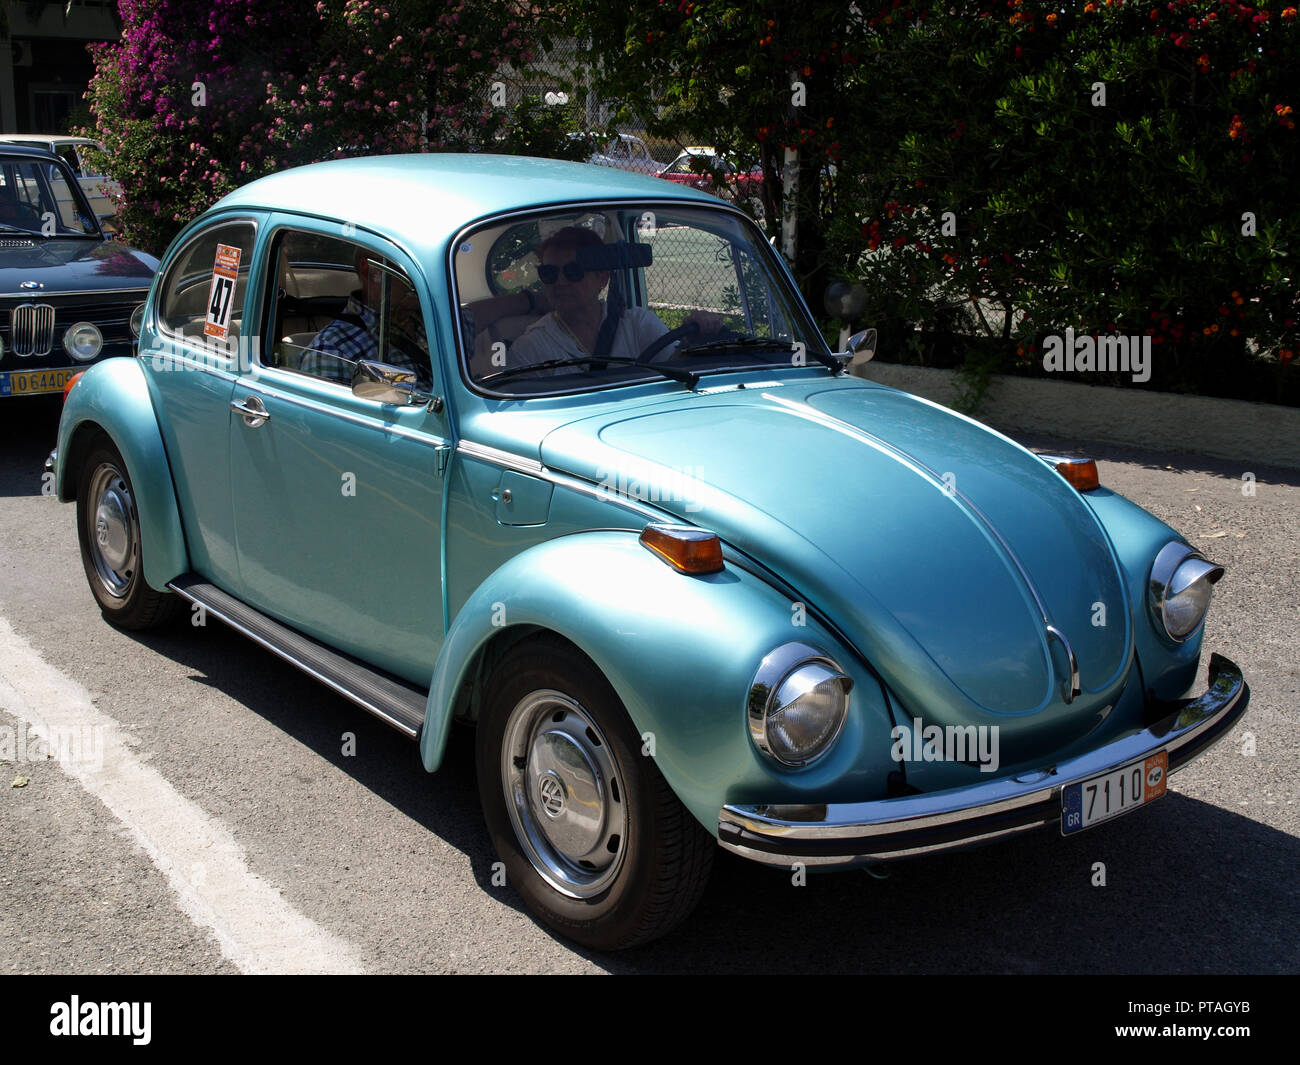 Vintage Volkswagen Beetle on display at the 8th Hellenic Bulgarian LEKAM classic car rally at the Acharavi Park Hotel, Acharavi, Corfu, Greece Stock Photo